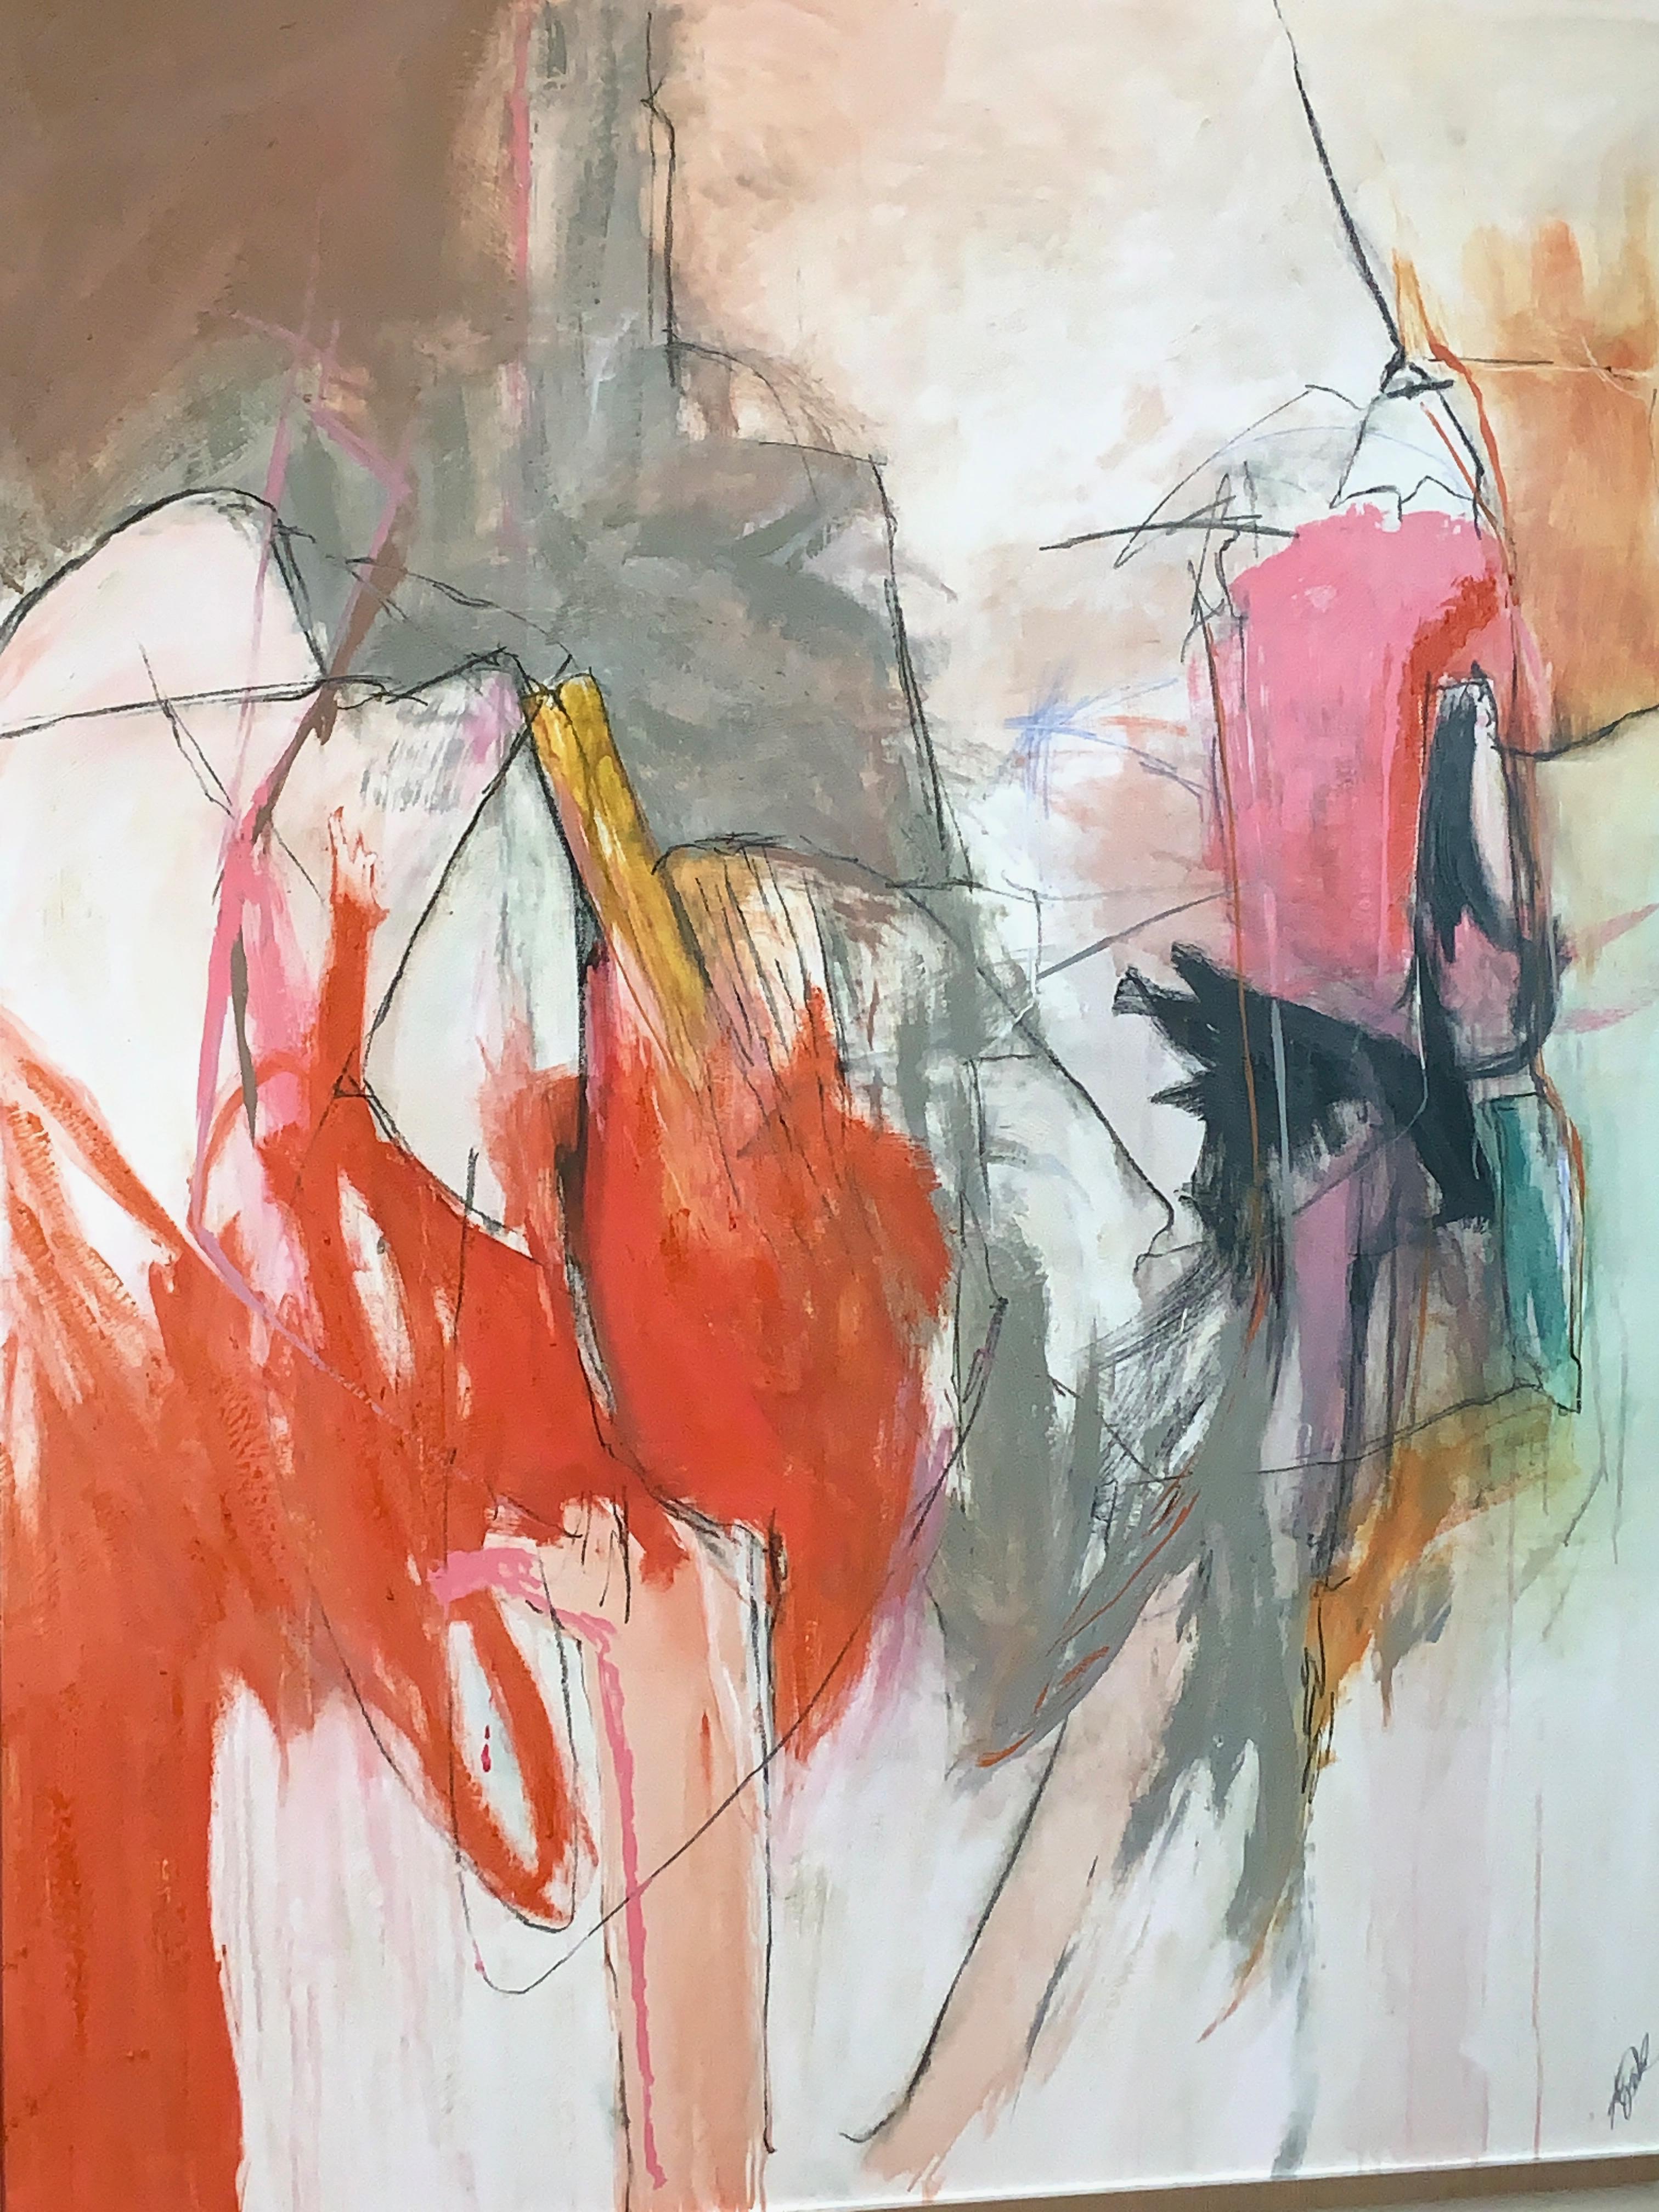 Hand-Painted Large Abstract Painting in Oranges, Pinks and Grays